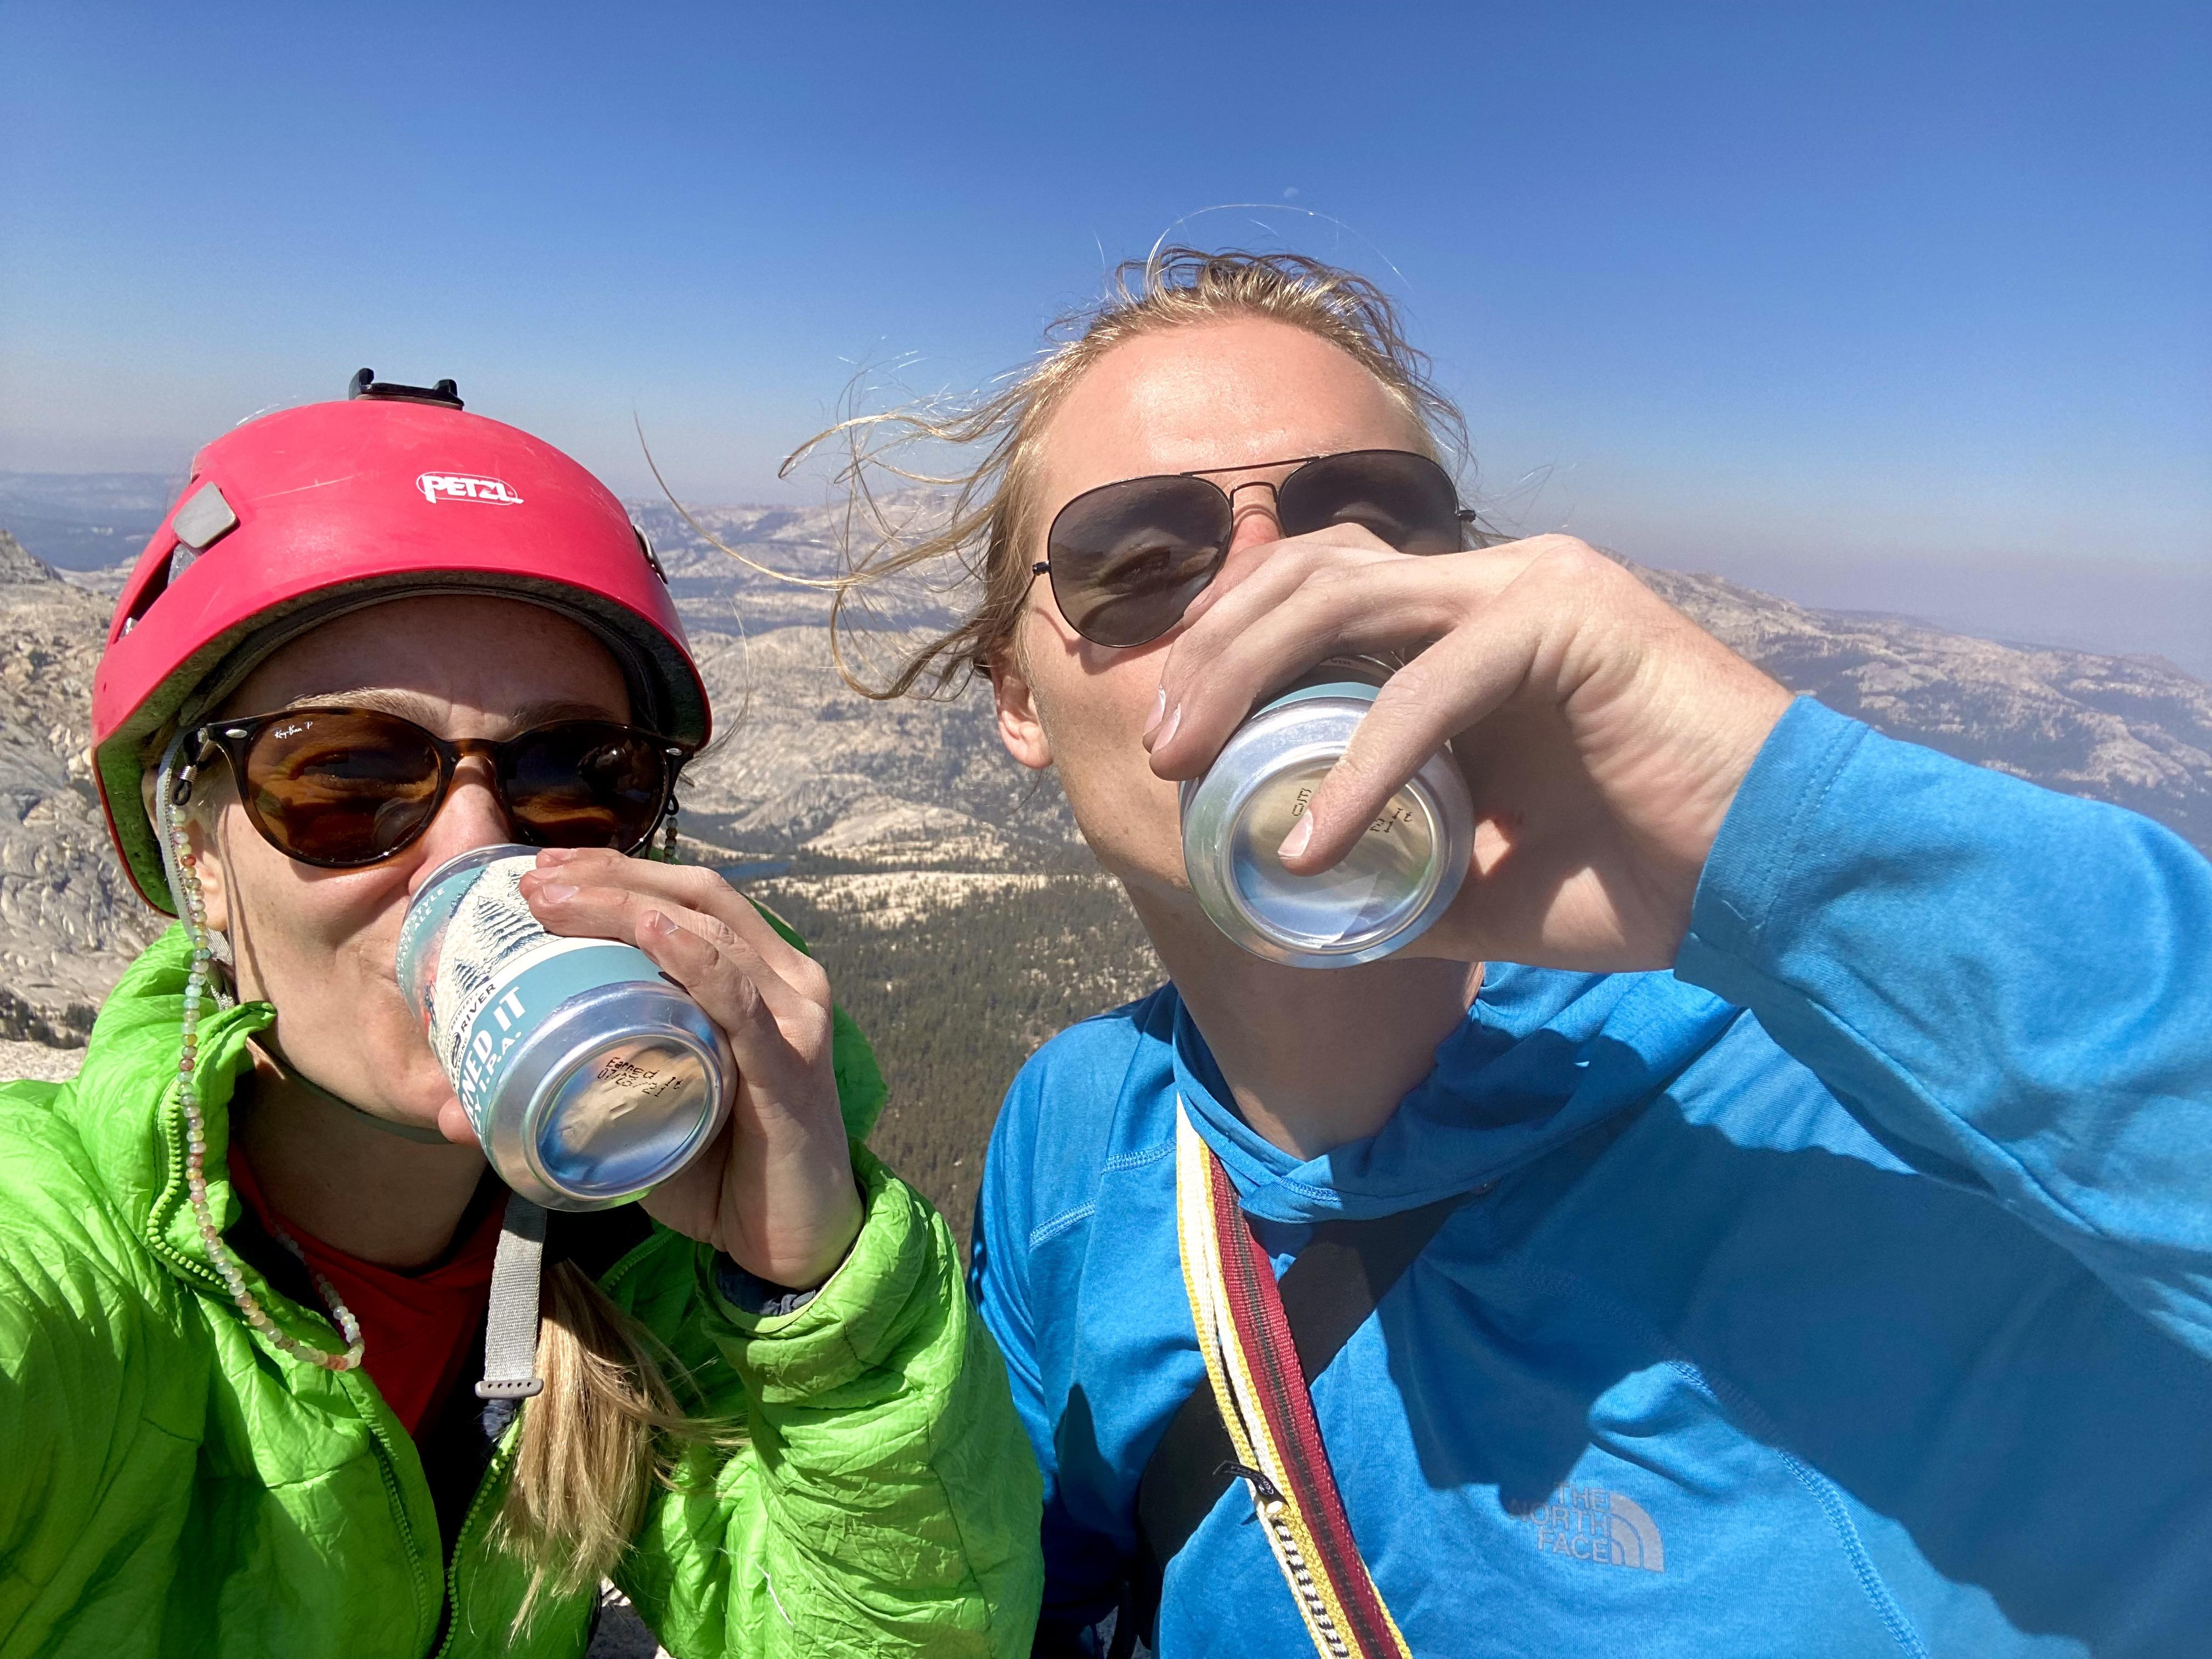 Sentry and Isabel drinking a beer on a climb